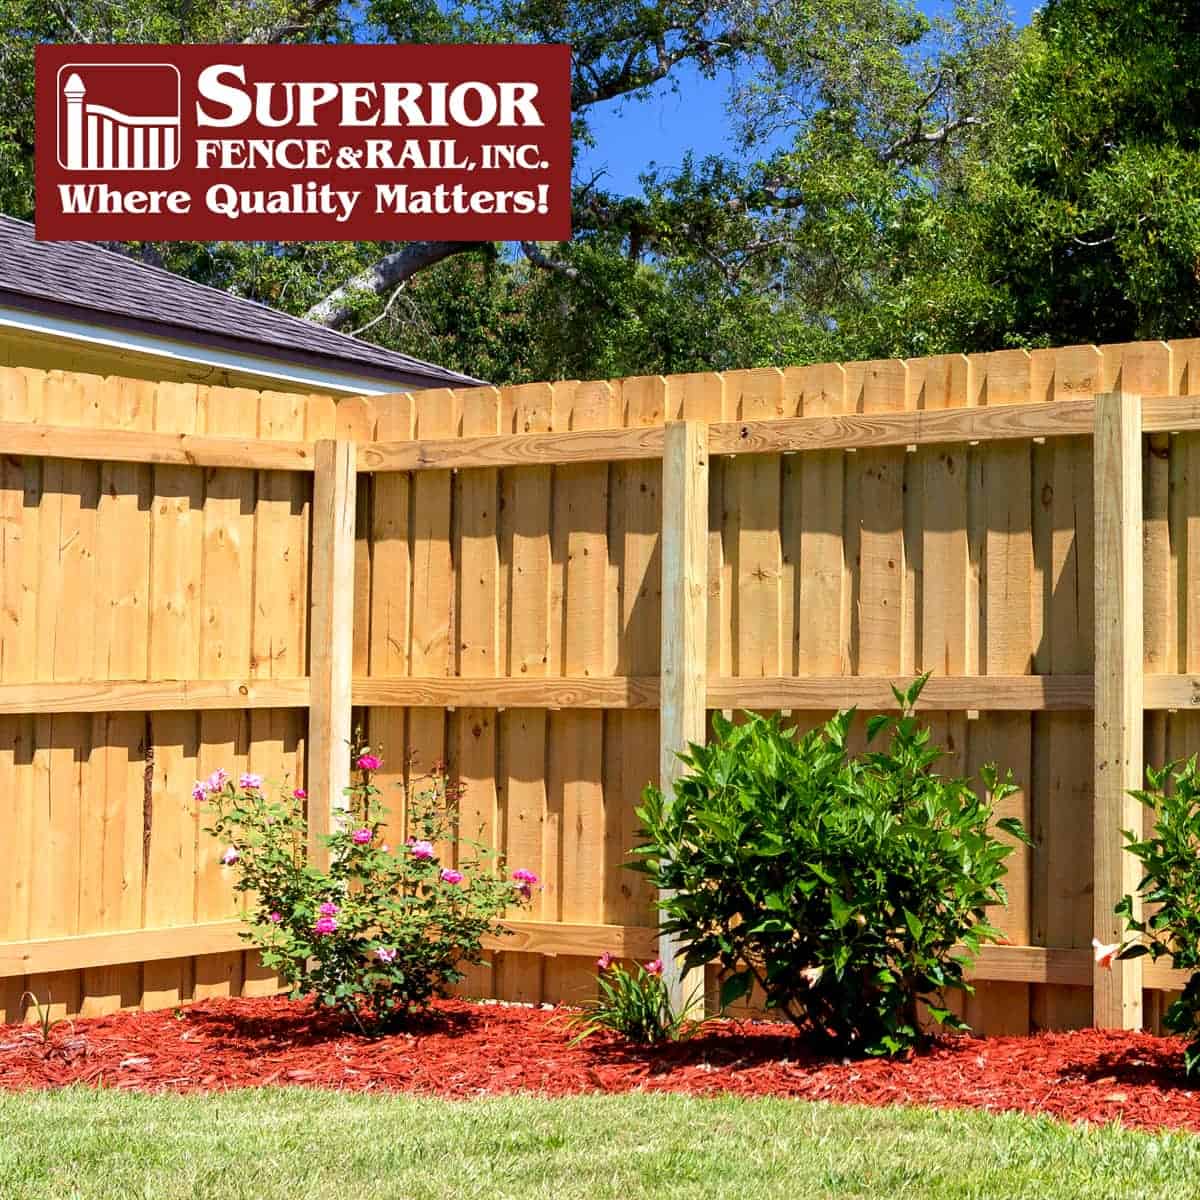 Metrowest fence company contractor